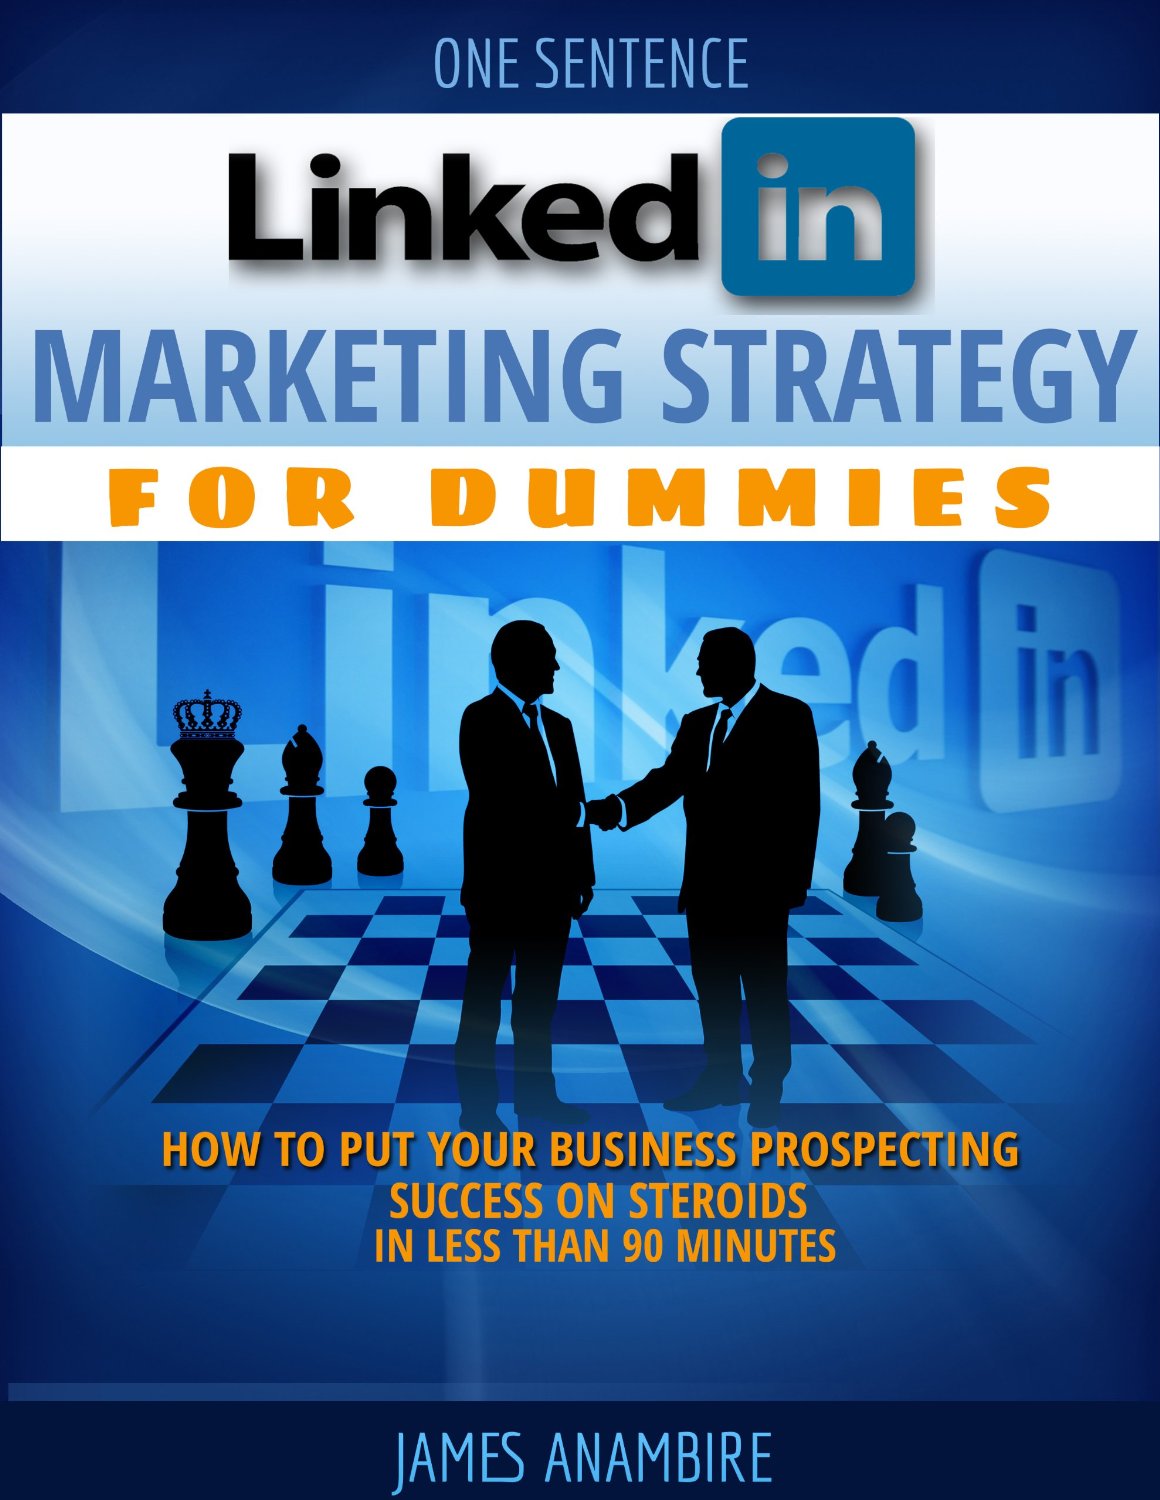 LinkedIn Marketing Strategy For Dummies by James Anambire